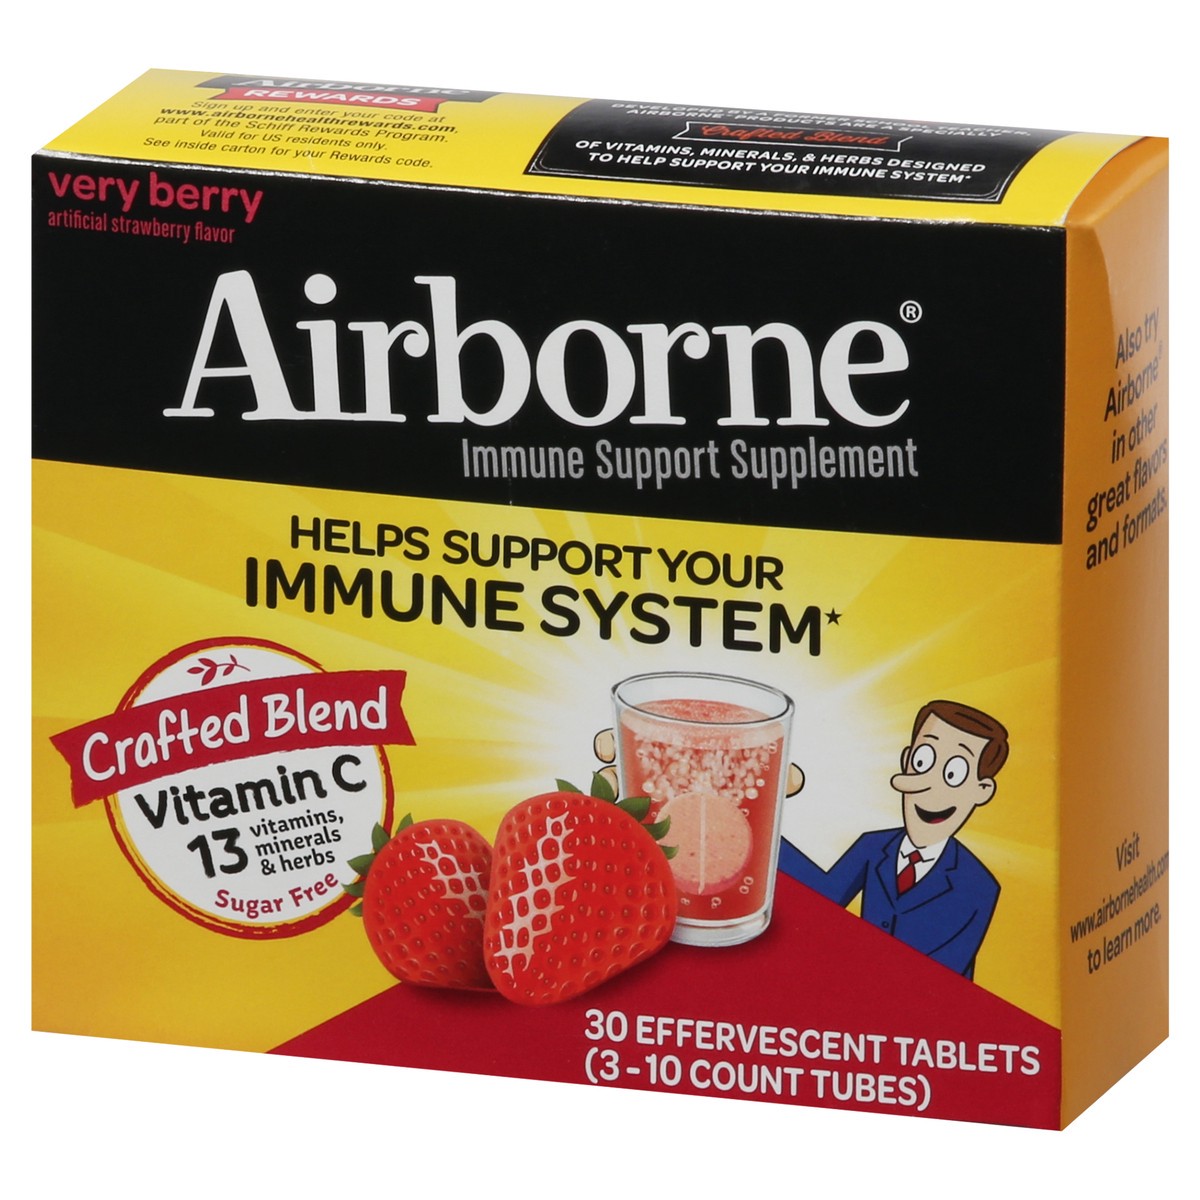 slide 11 of 14, Airborne Very Berry Effervescent Tablets, 30 count - 1000mg of Vitamin C, Immune Support Supplement, 30 ct